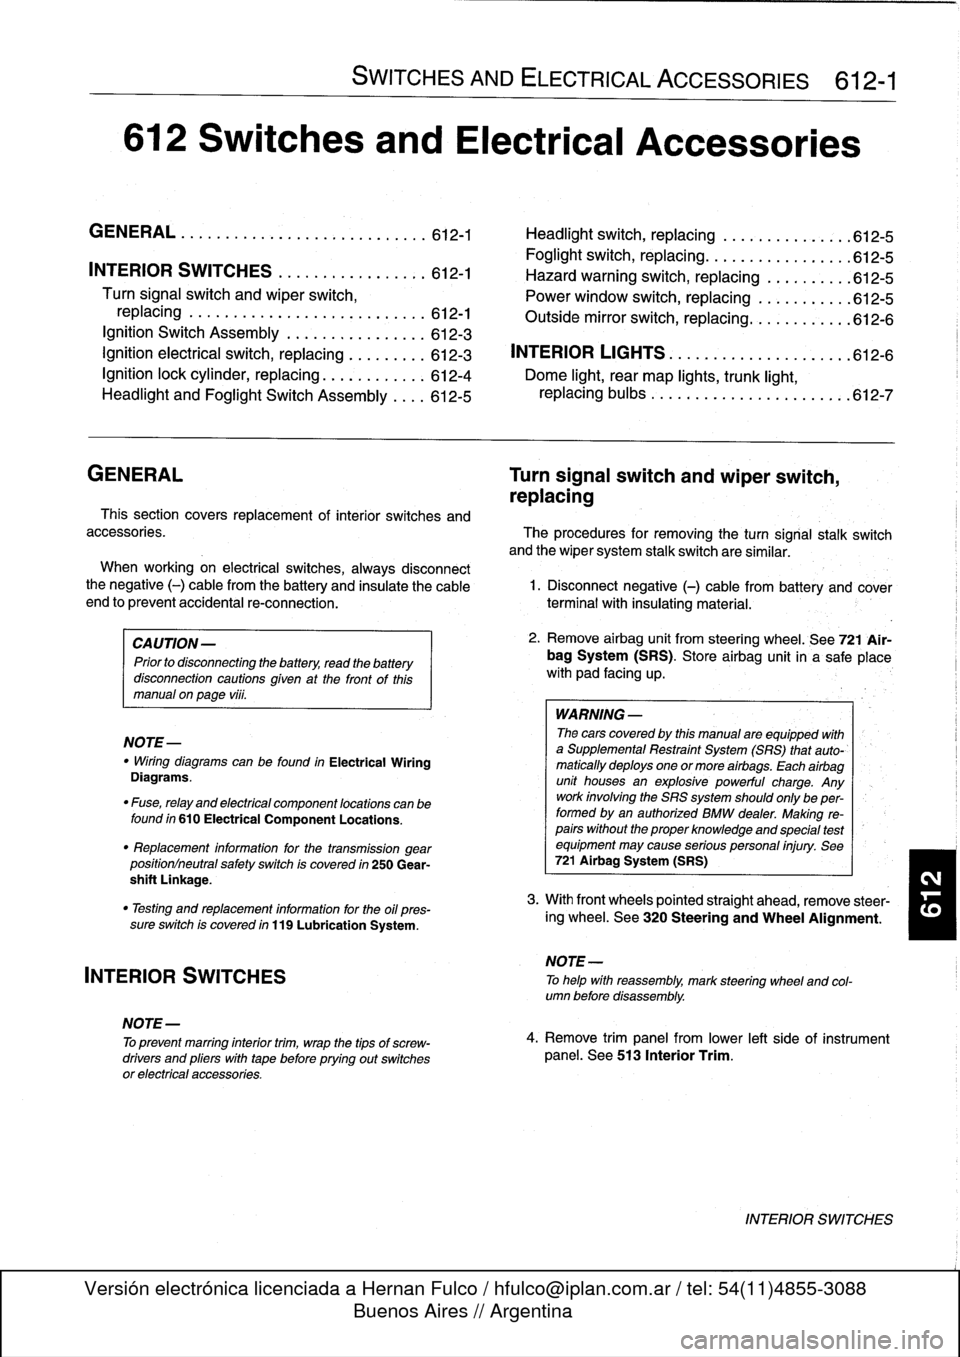 BMW 318i 1997 E36 Service Manual 
612
Switches
and
Electrical
Accessories

GENERAL
.
.
.
.
.
.
.
.
.
...
.
.
.
.
.
...
.
......
.612-1

	

Headlight
switch,
replacing

	

..
.
...
.
.
.
.
.
.
.
.
.
612-5

Foglight
switch,
replacing
.